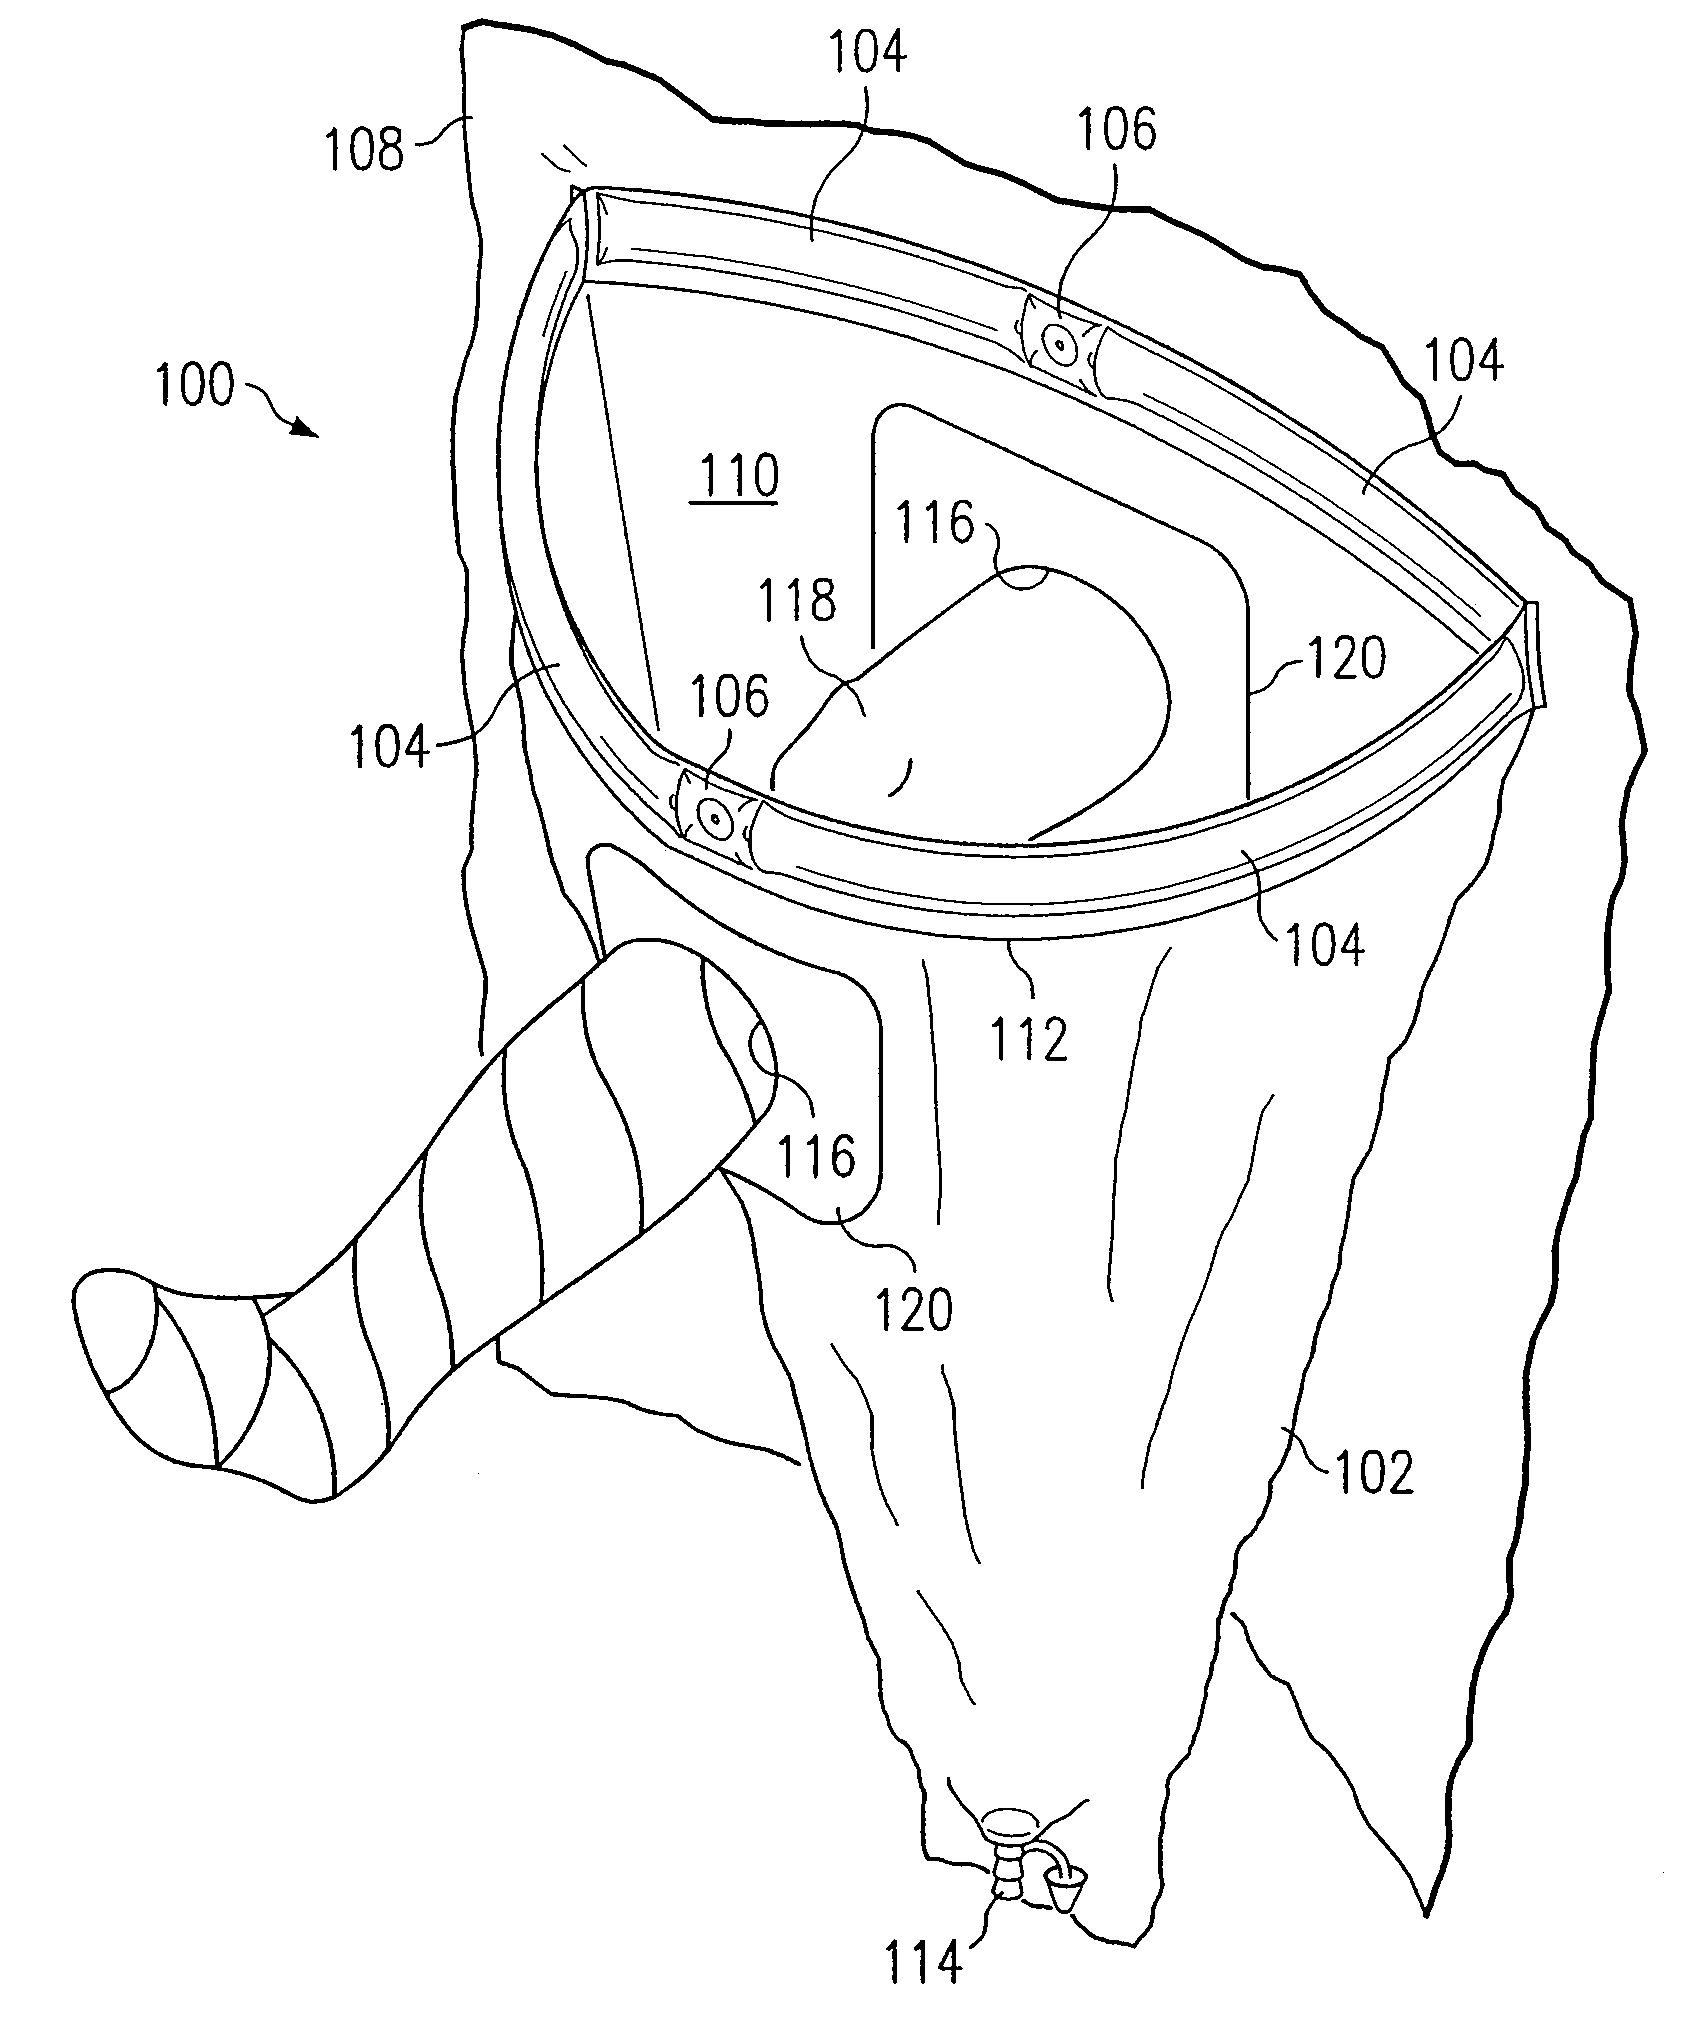 Surgical drape having a fluid collection pouch with an inflatable rim